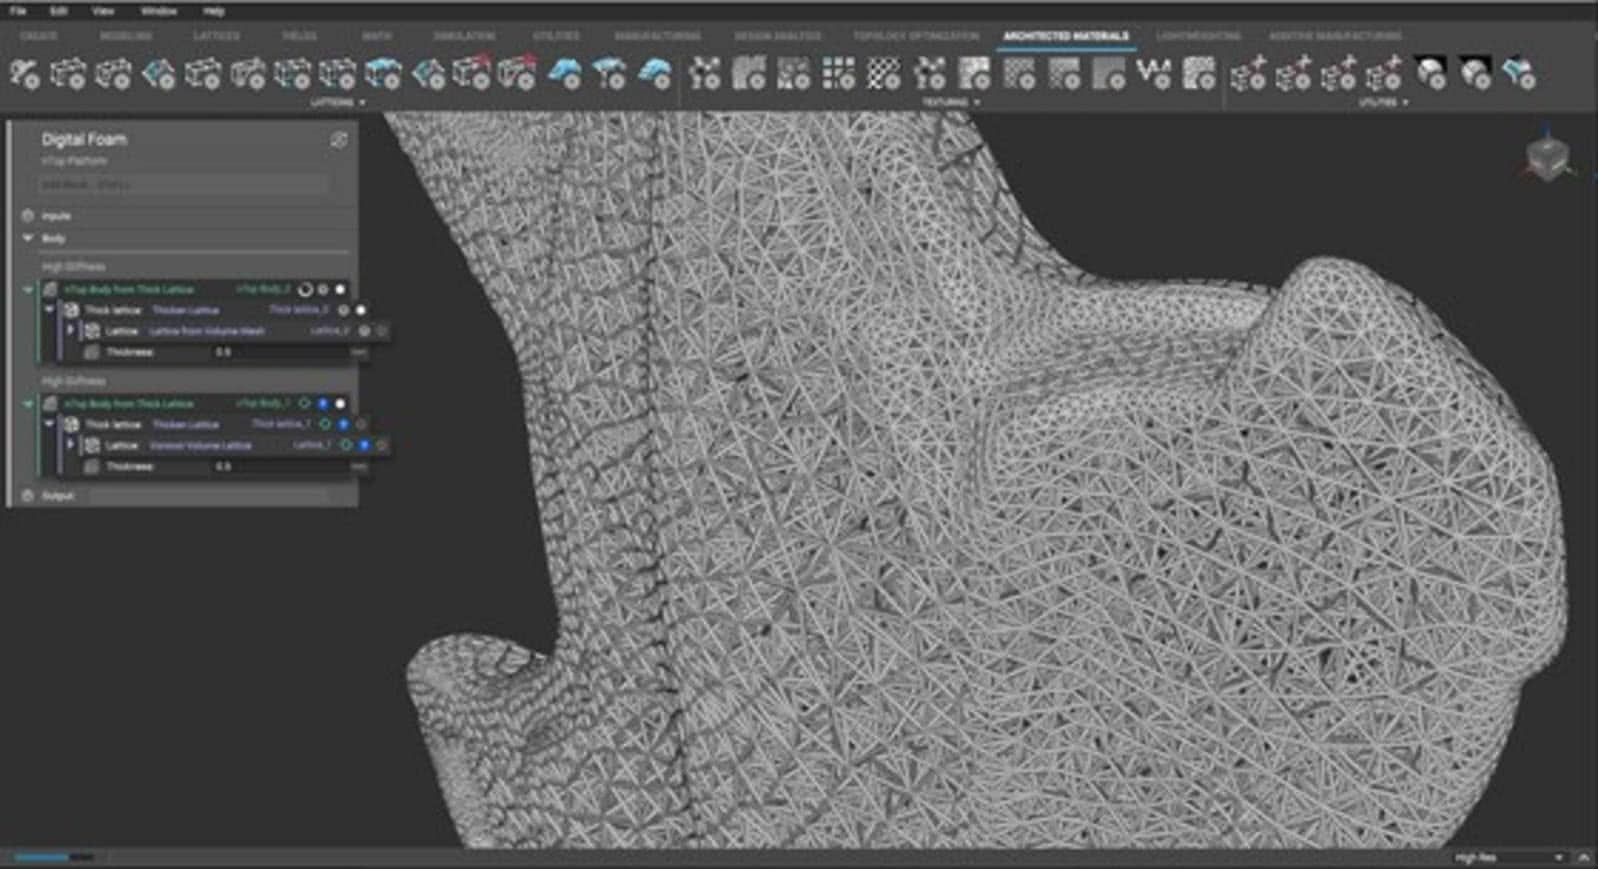 The nTopology modeling software used for EOS Digital Foam. (Image courtesy of nTopology.)